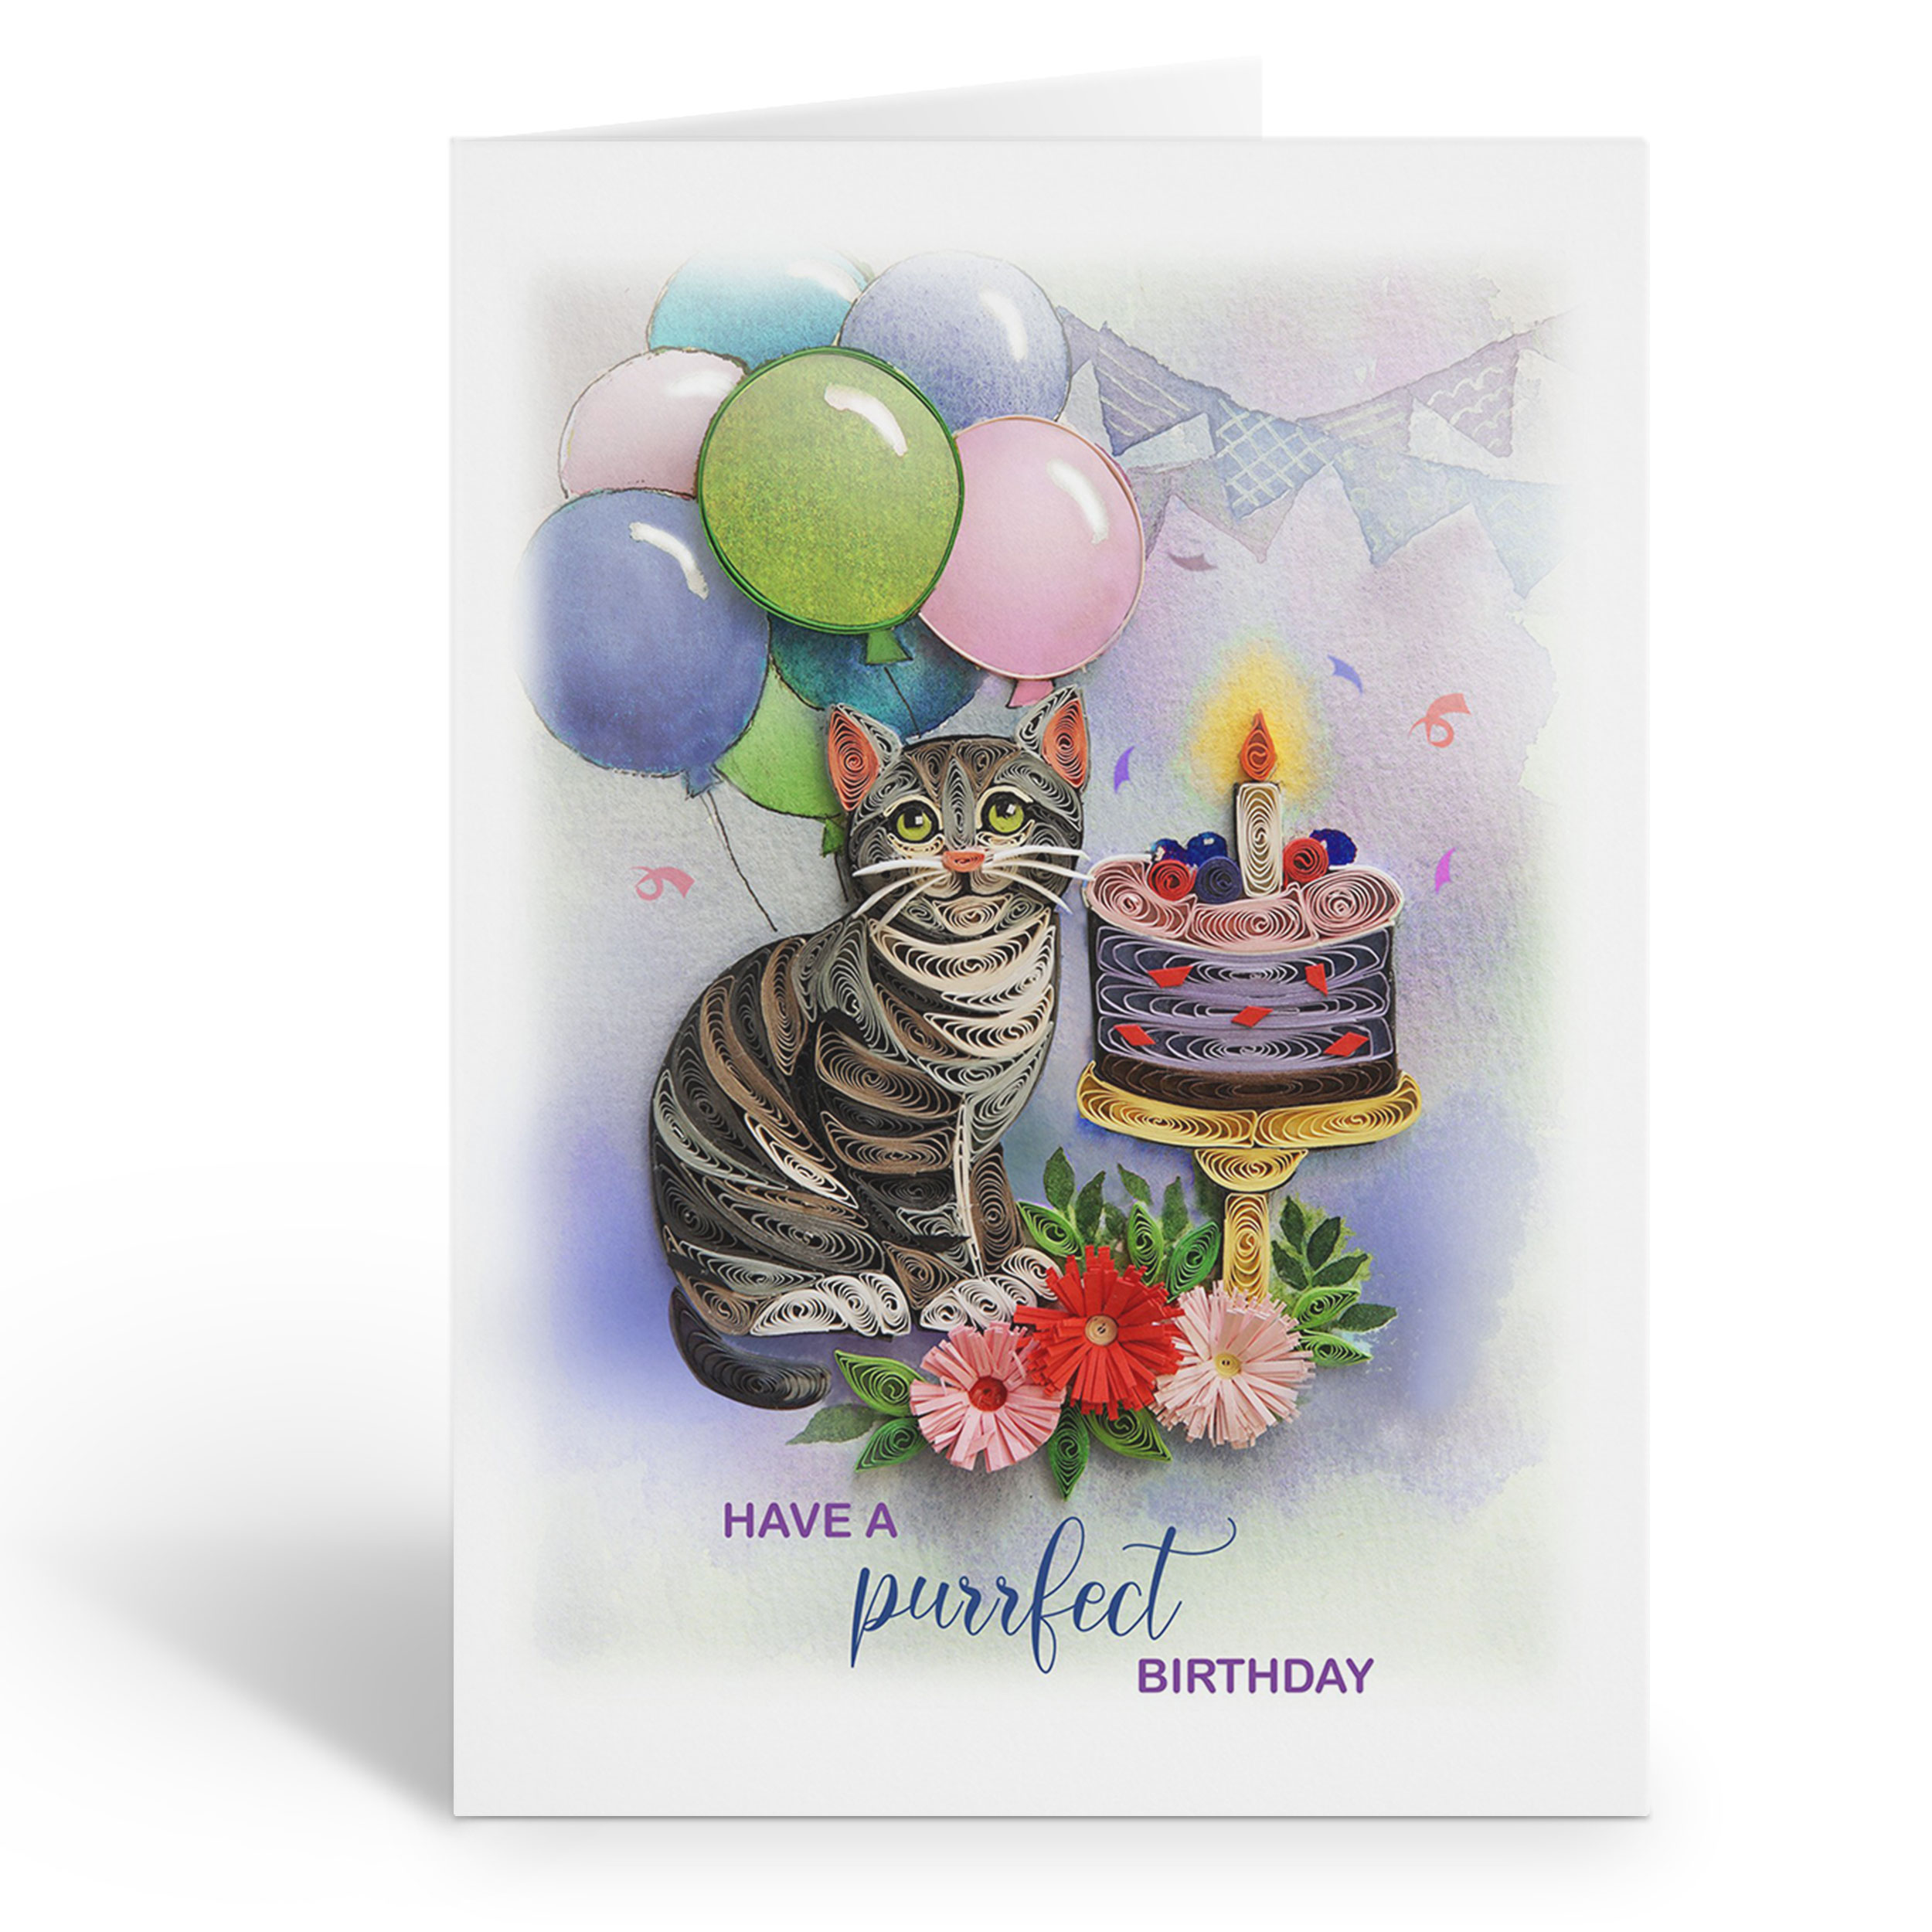 Have a Purrfect Birthday – Cat Birthday Card